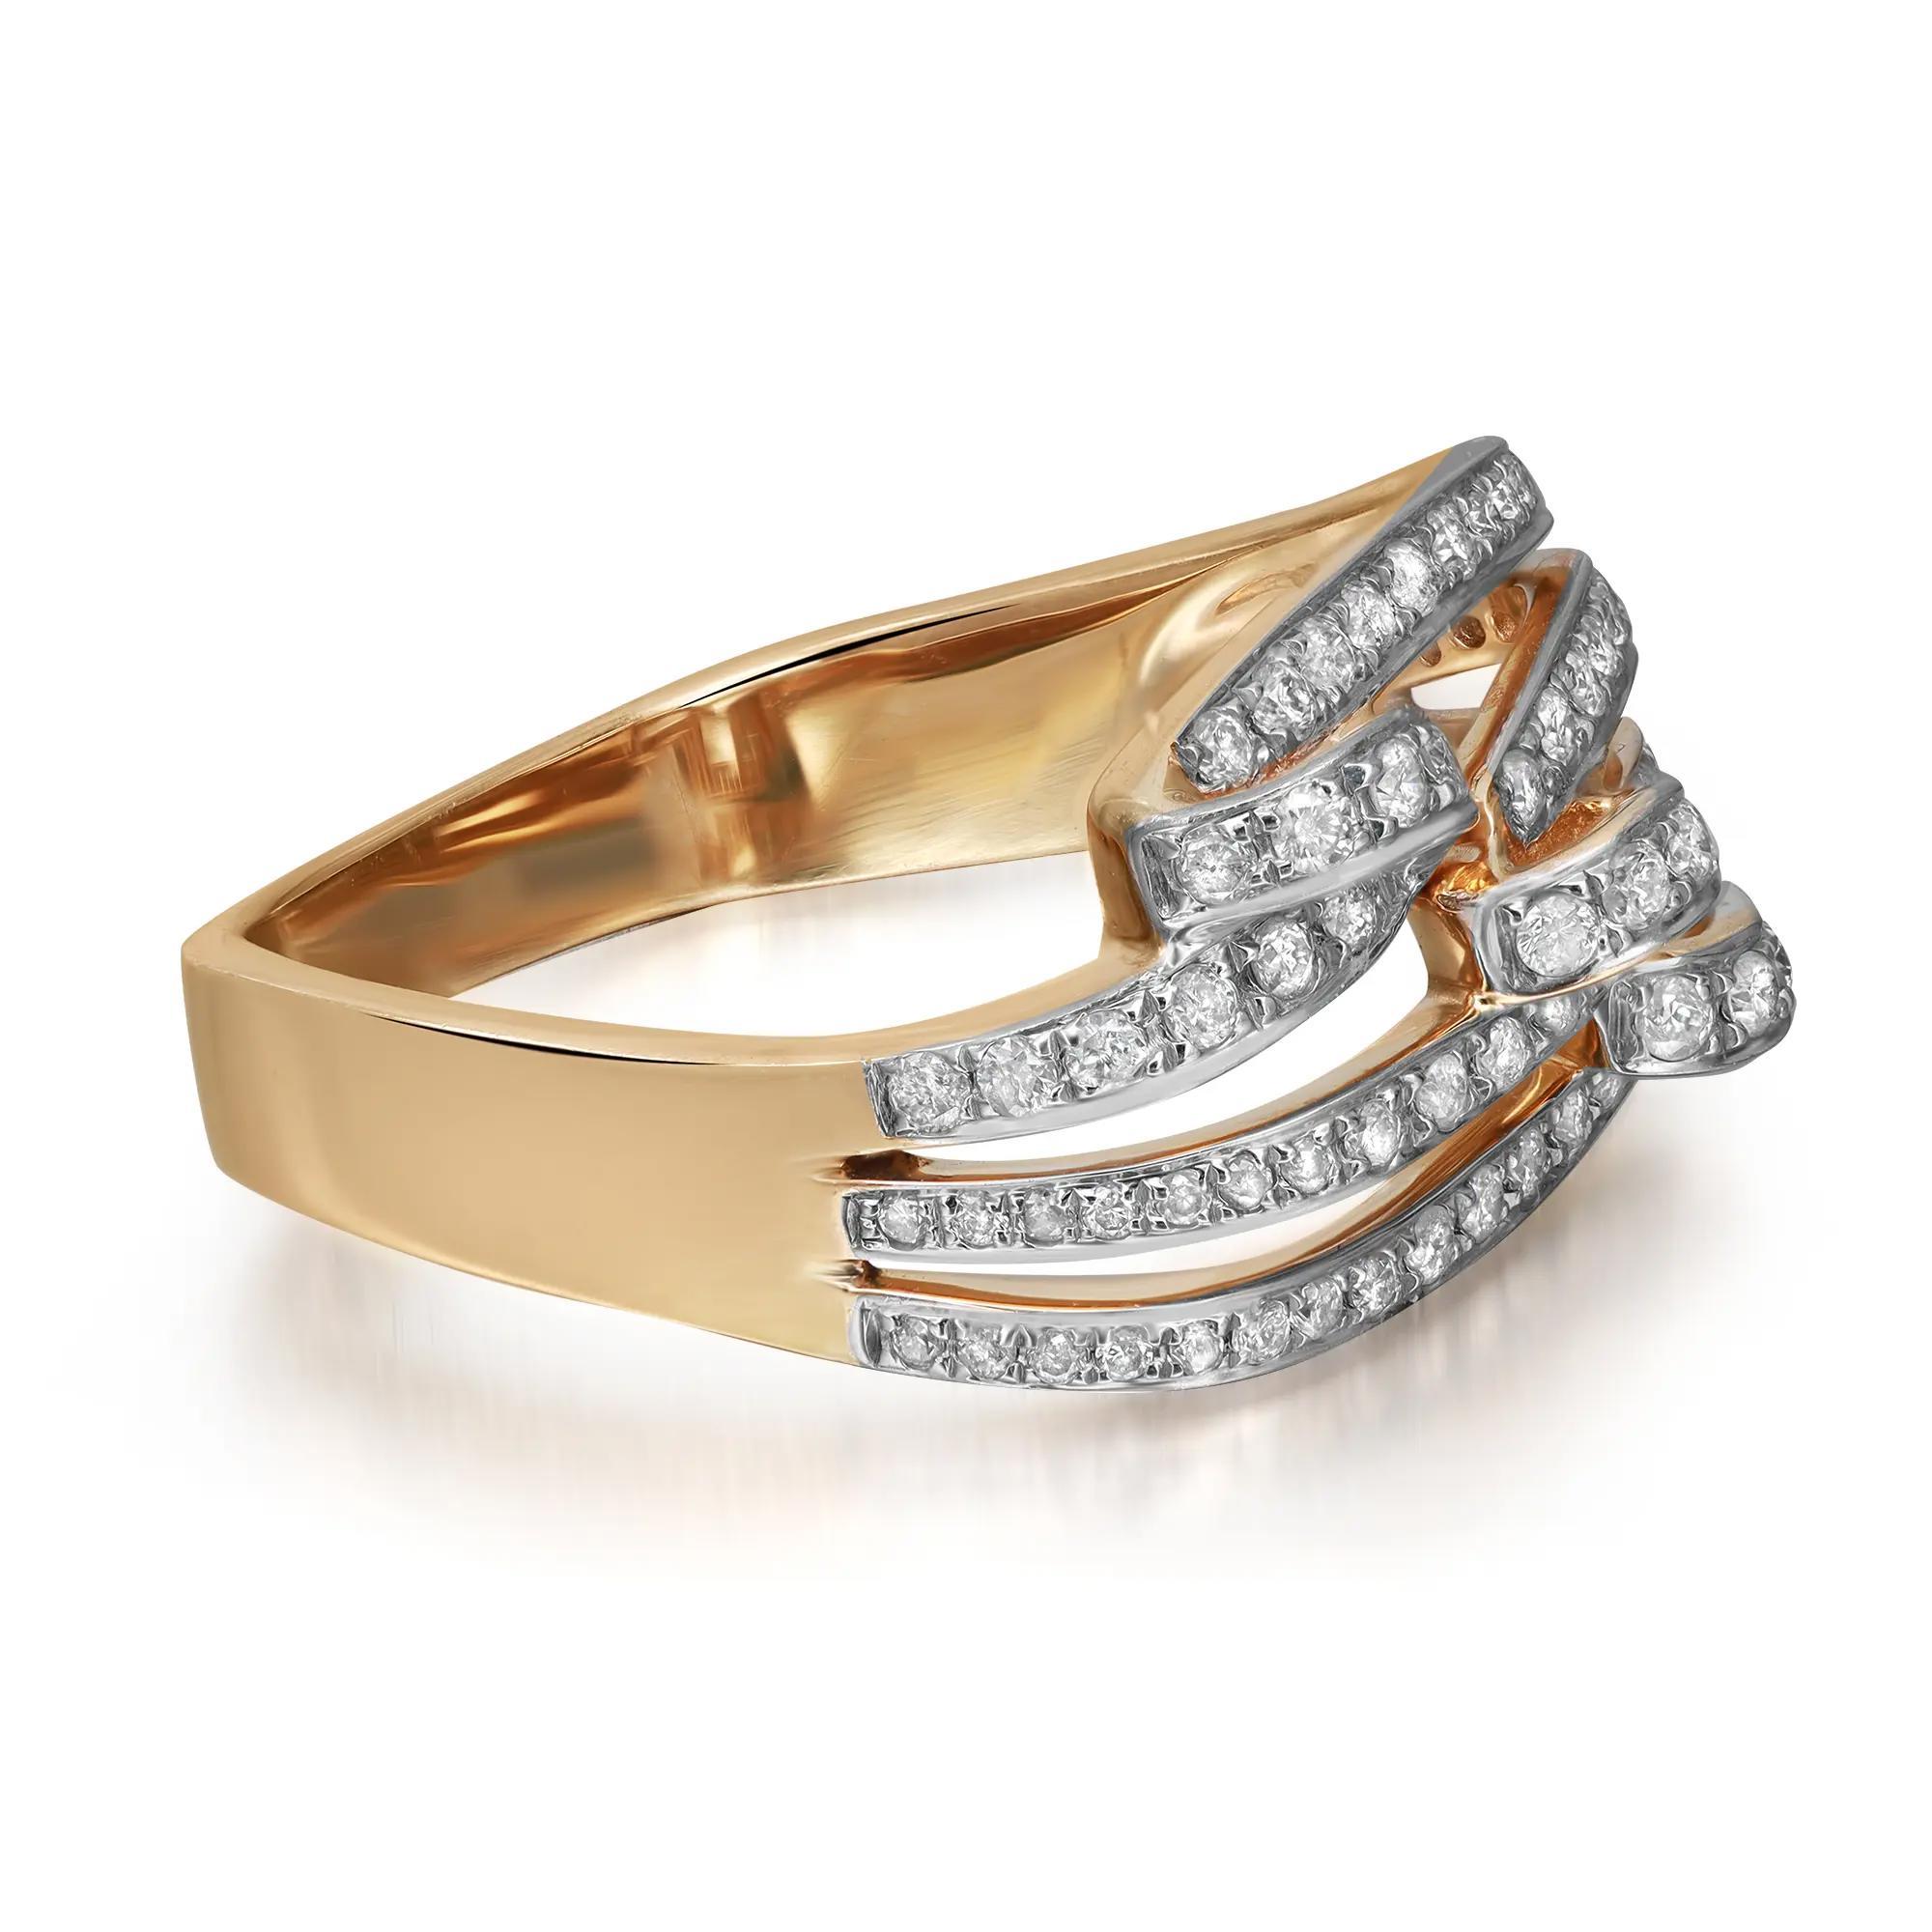 This gorgeous diamond ladies cocktail ring exceptionally showcases prong set round brilliant cut diamonds in a unique three row shank. Crafted in fine 14k yellow gold. Total diamond weight: 0.55 carat. Diamond quality: color I and SI clarity. Ring